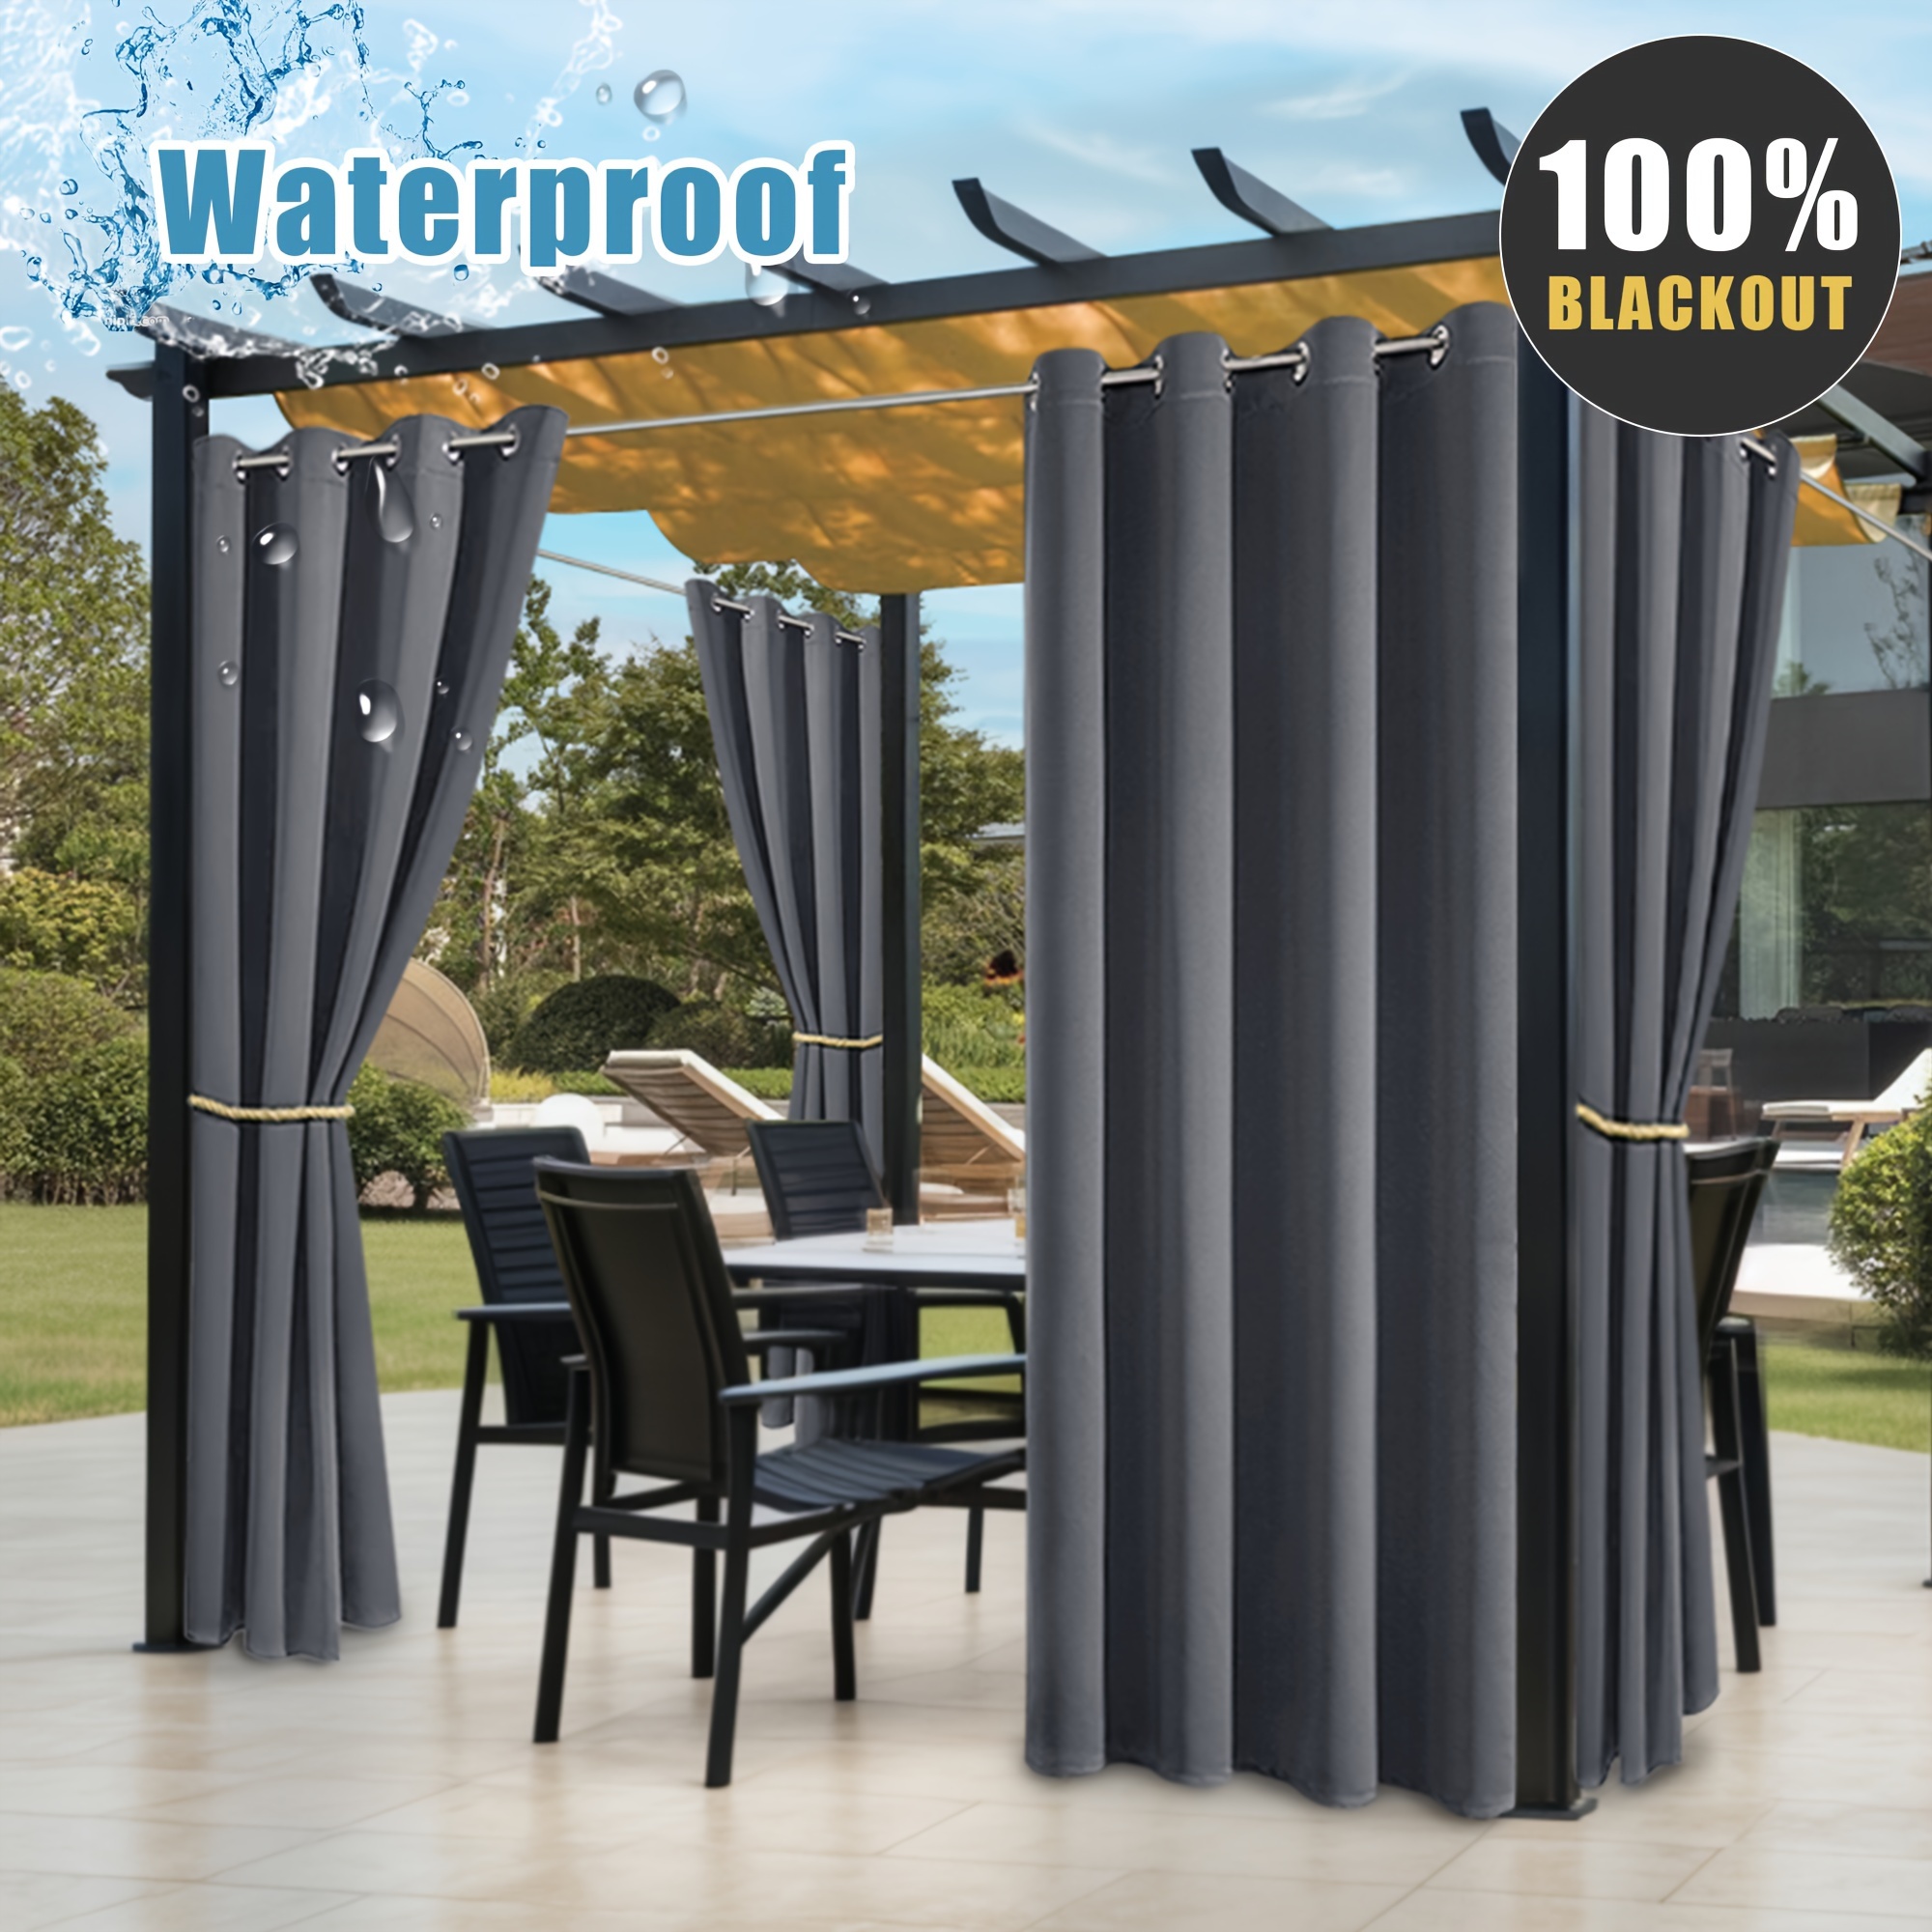 

1pc Waterproof Outdoor Curtain For Patio Pergola, 100% Blackout Uv Protection Grommet Window Drapes, Modern Patio Privacy Sunshade For Porch Canopy